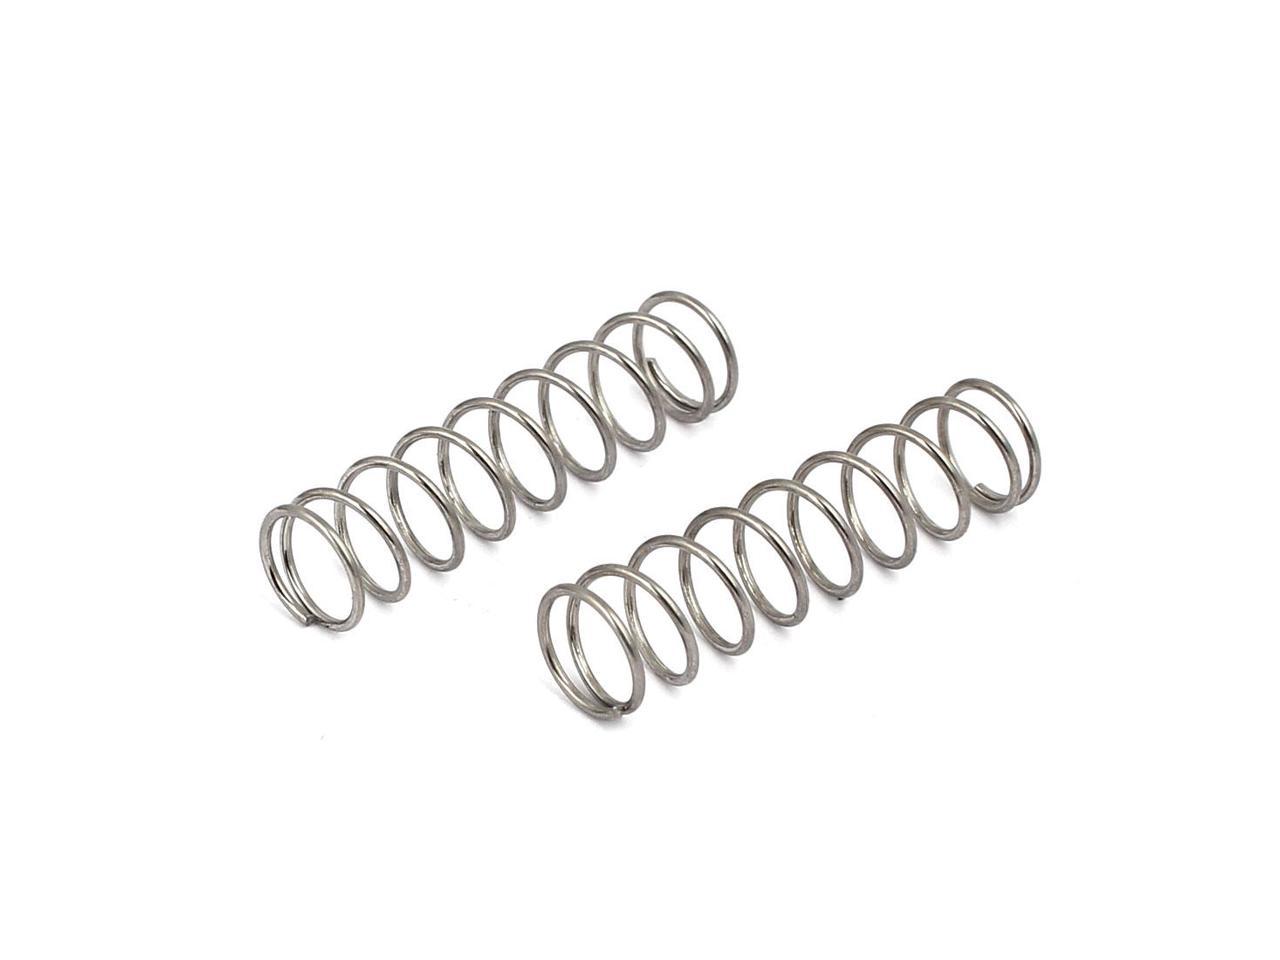 0.7mmx5mmx10mm 304 Stainless Steel Compression Springs Silver Tone 10pcs 